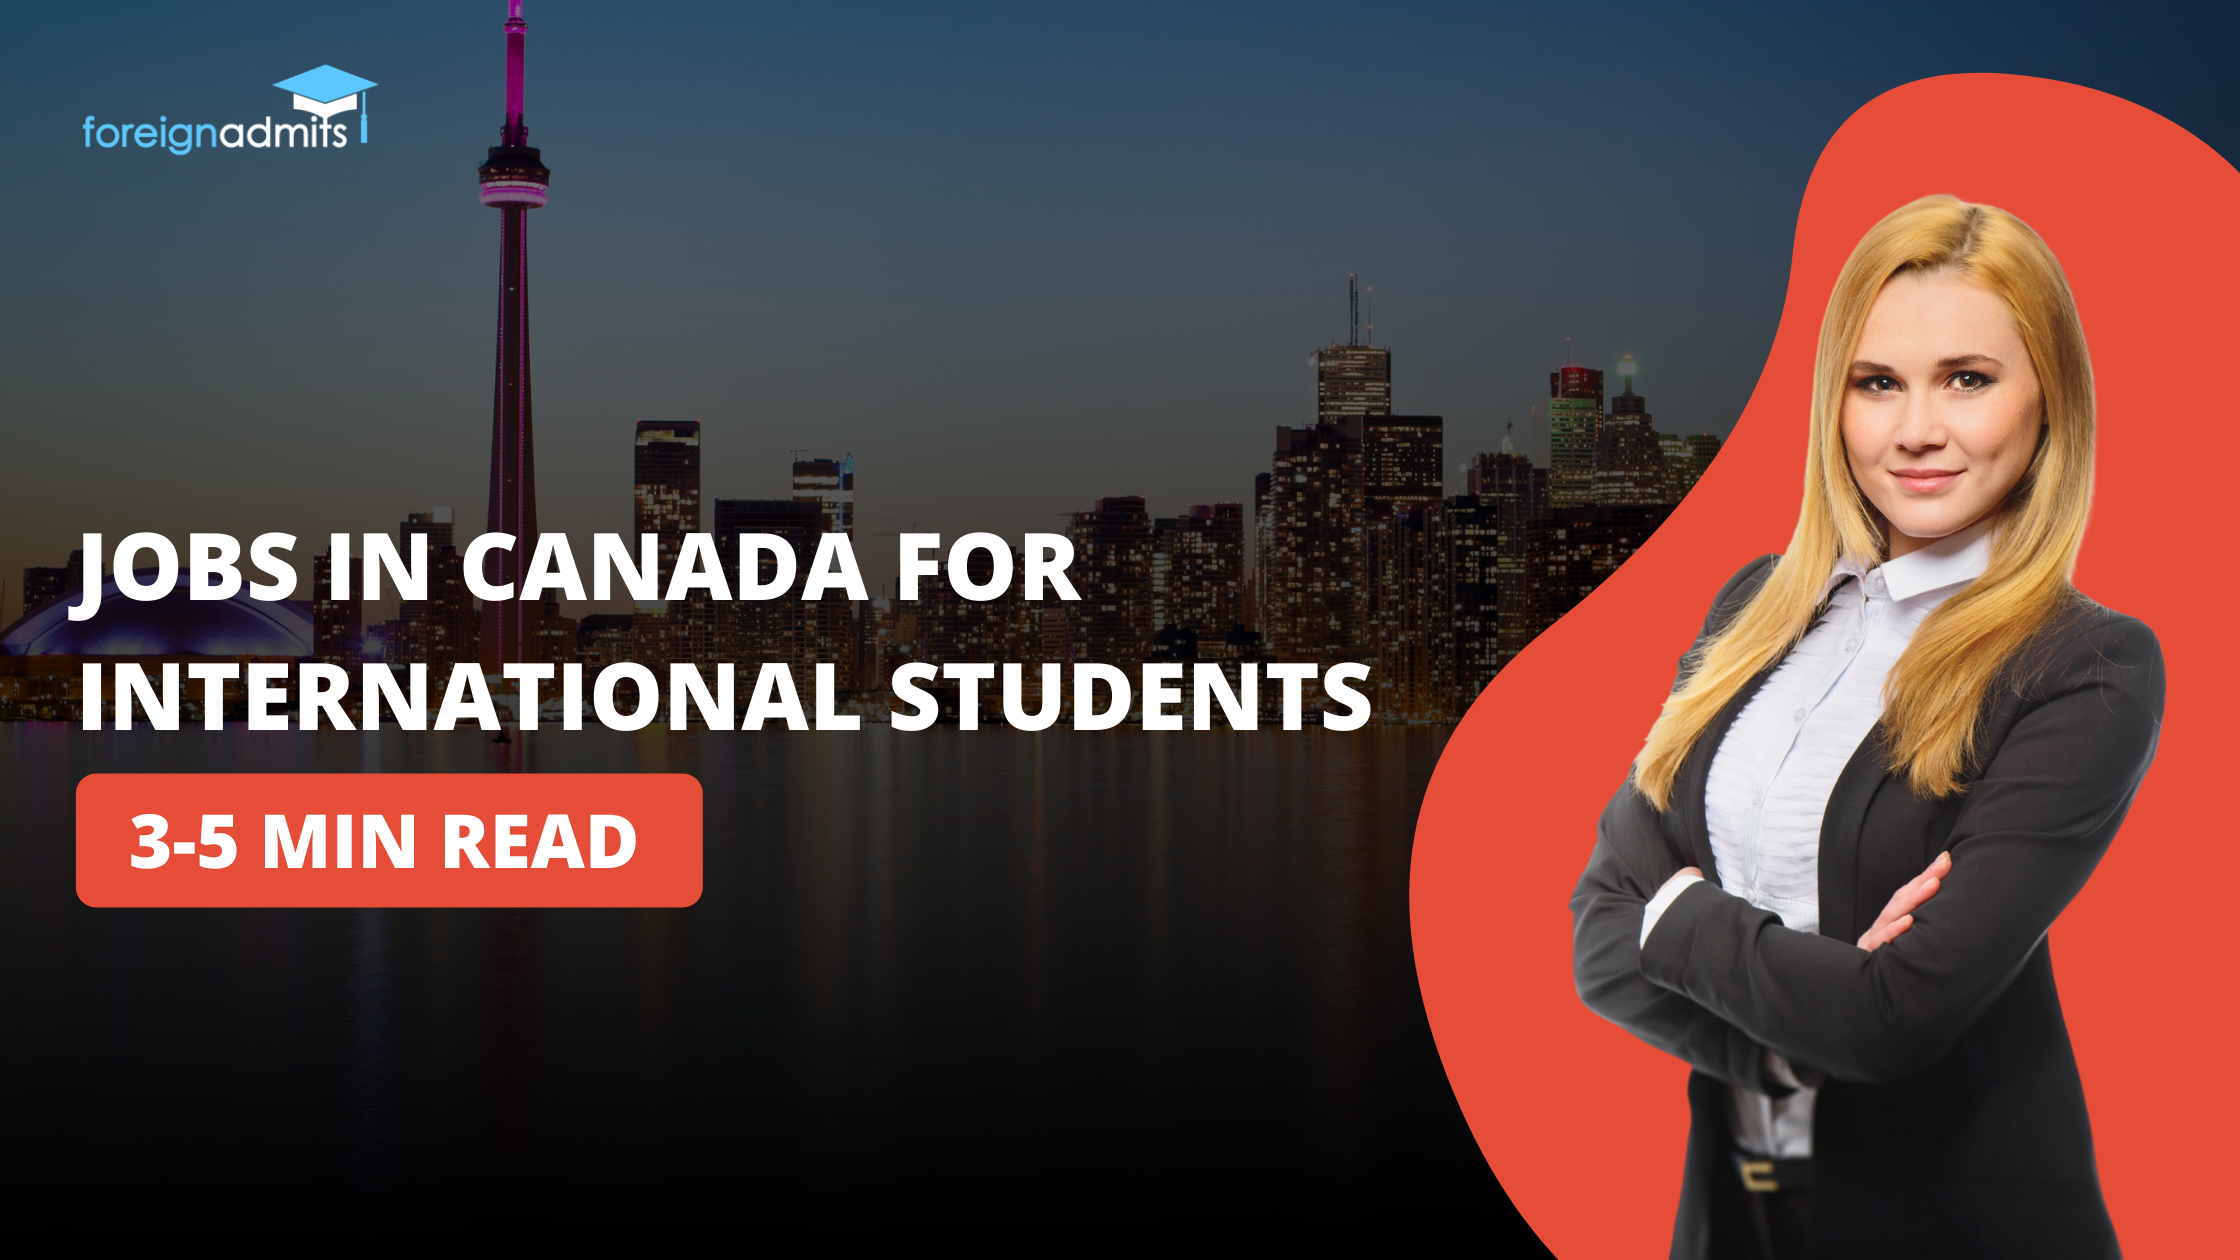 Jobs in Canada for International Students